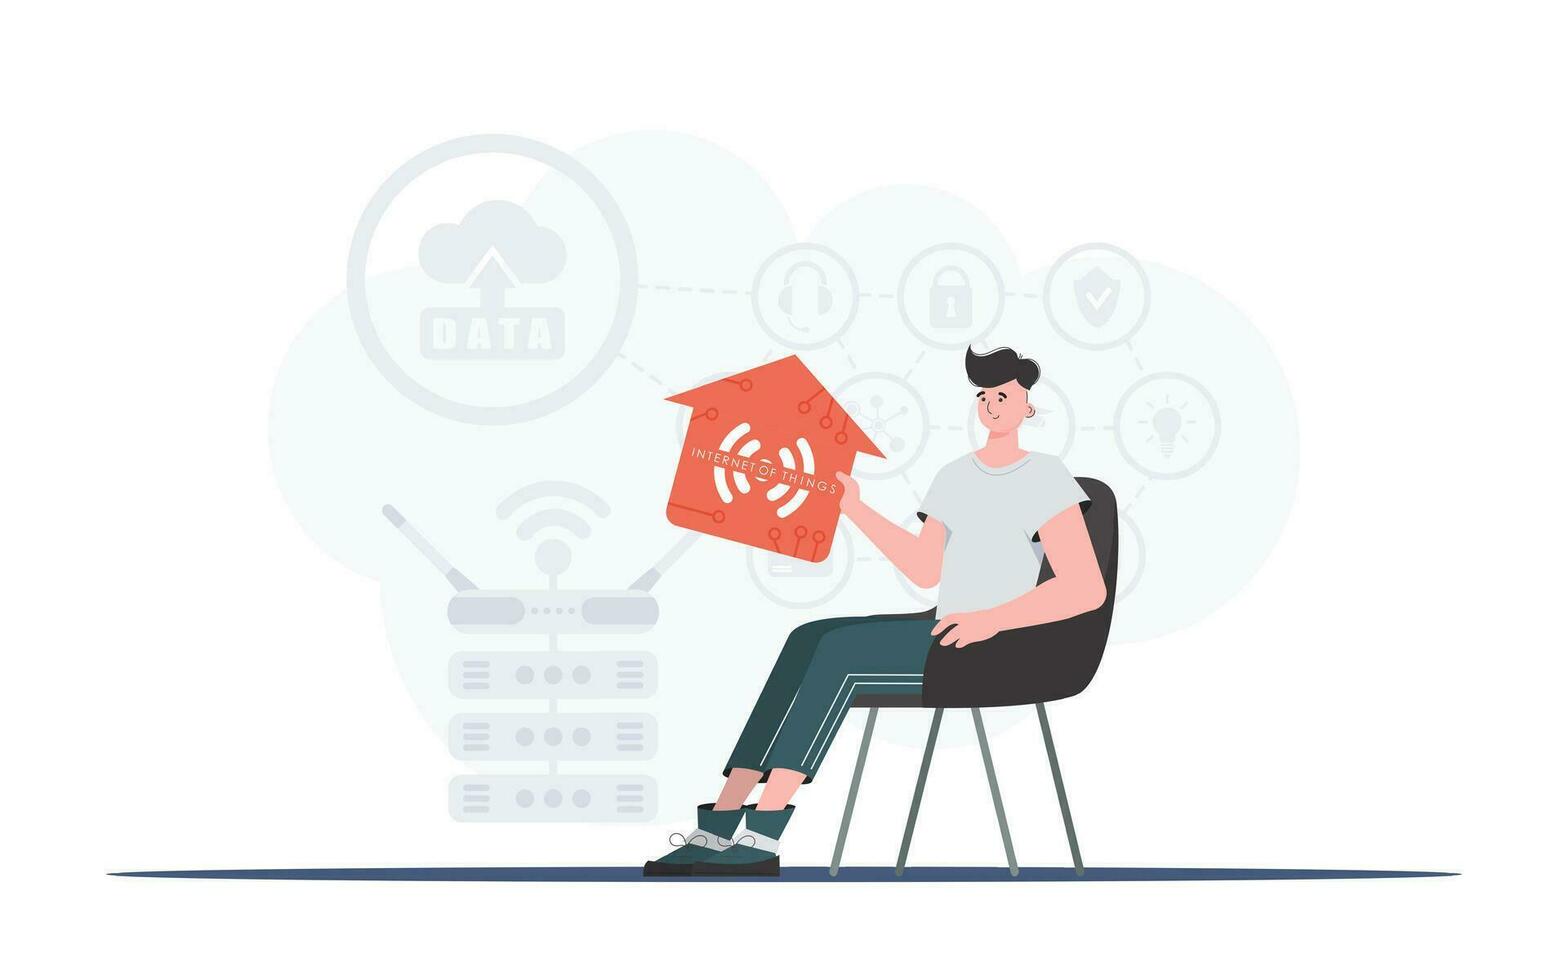 Internet of things concept. A man sits in an armchair and holds a house icon in his hands. Good for websites and presentations. Vector illustration in flat style.